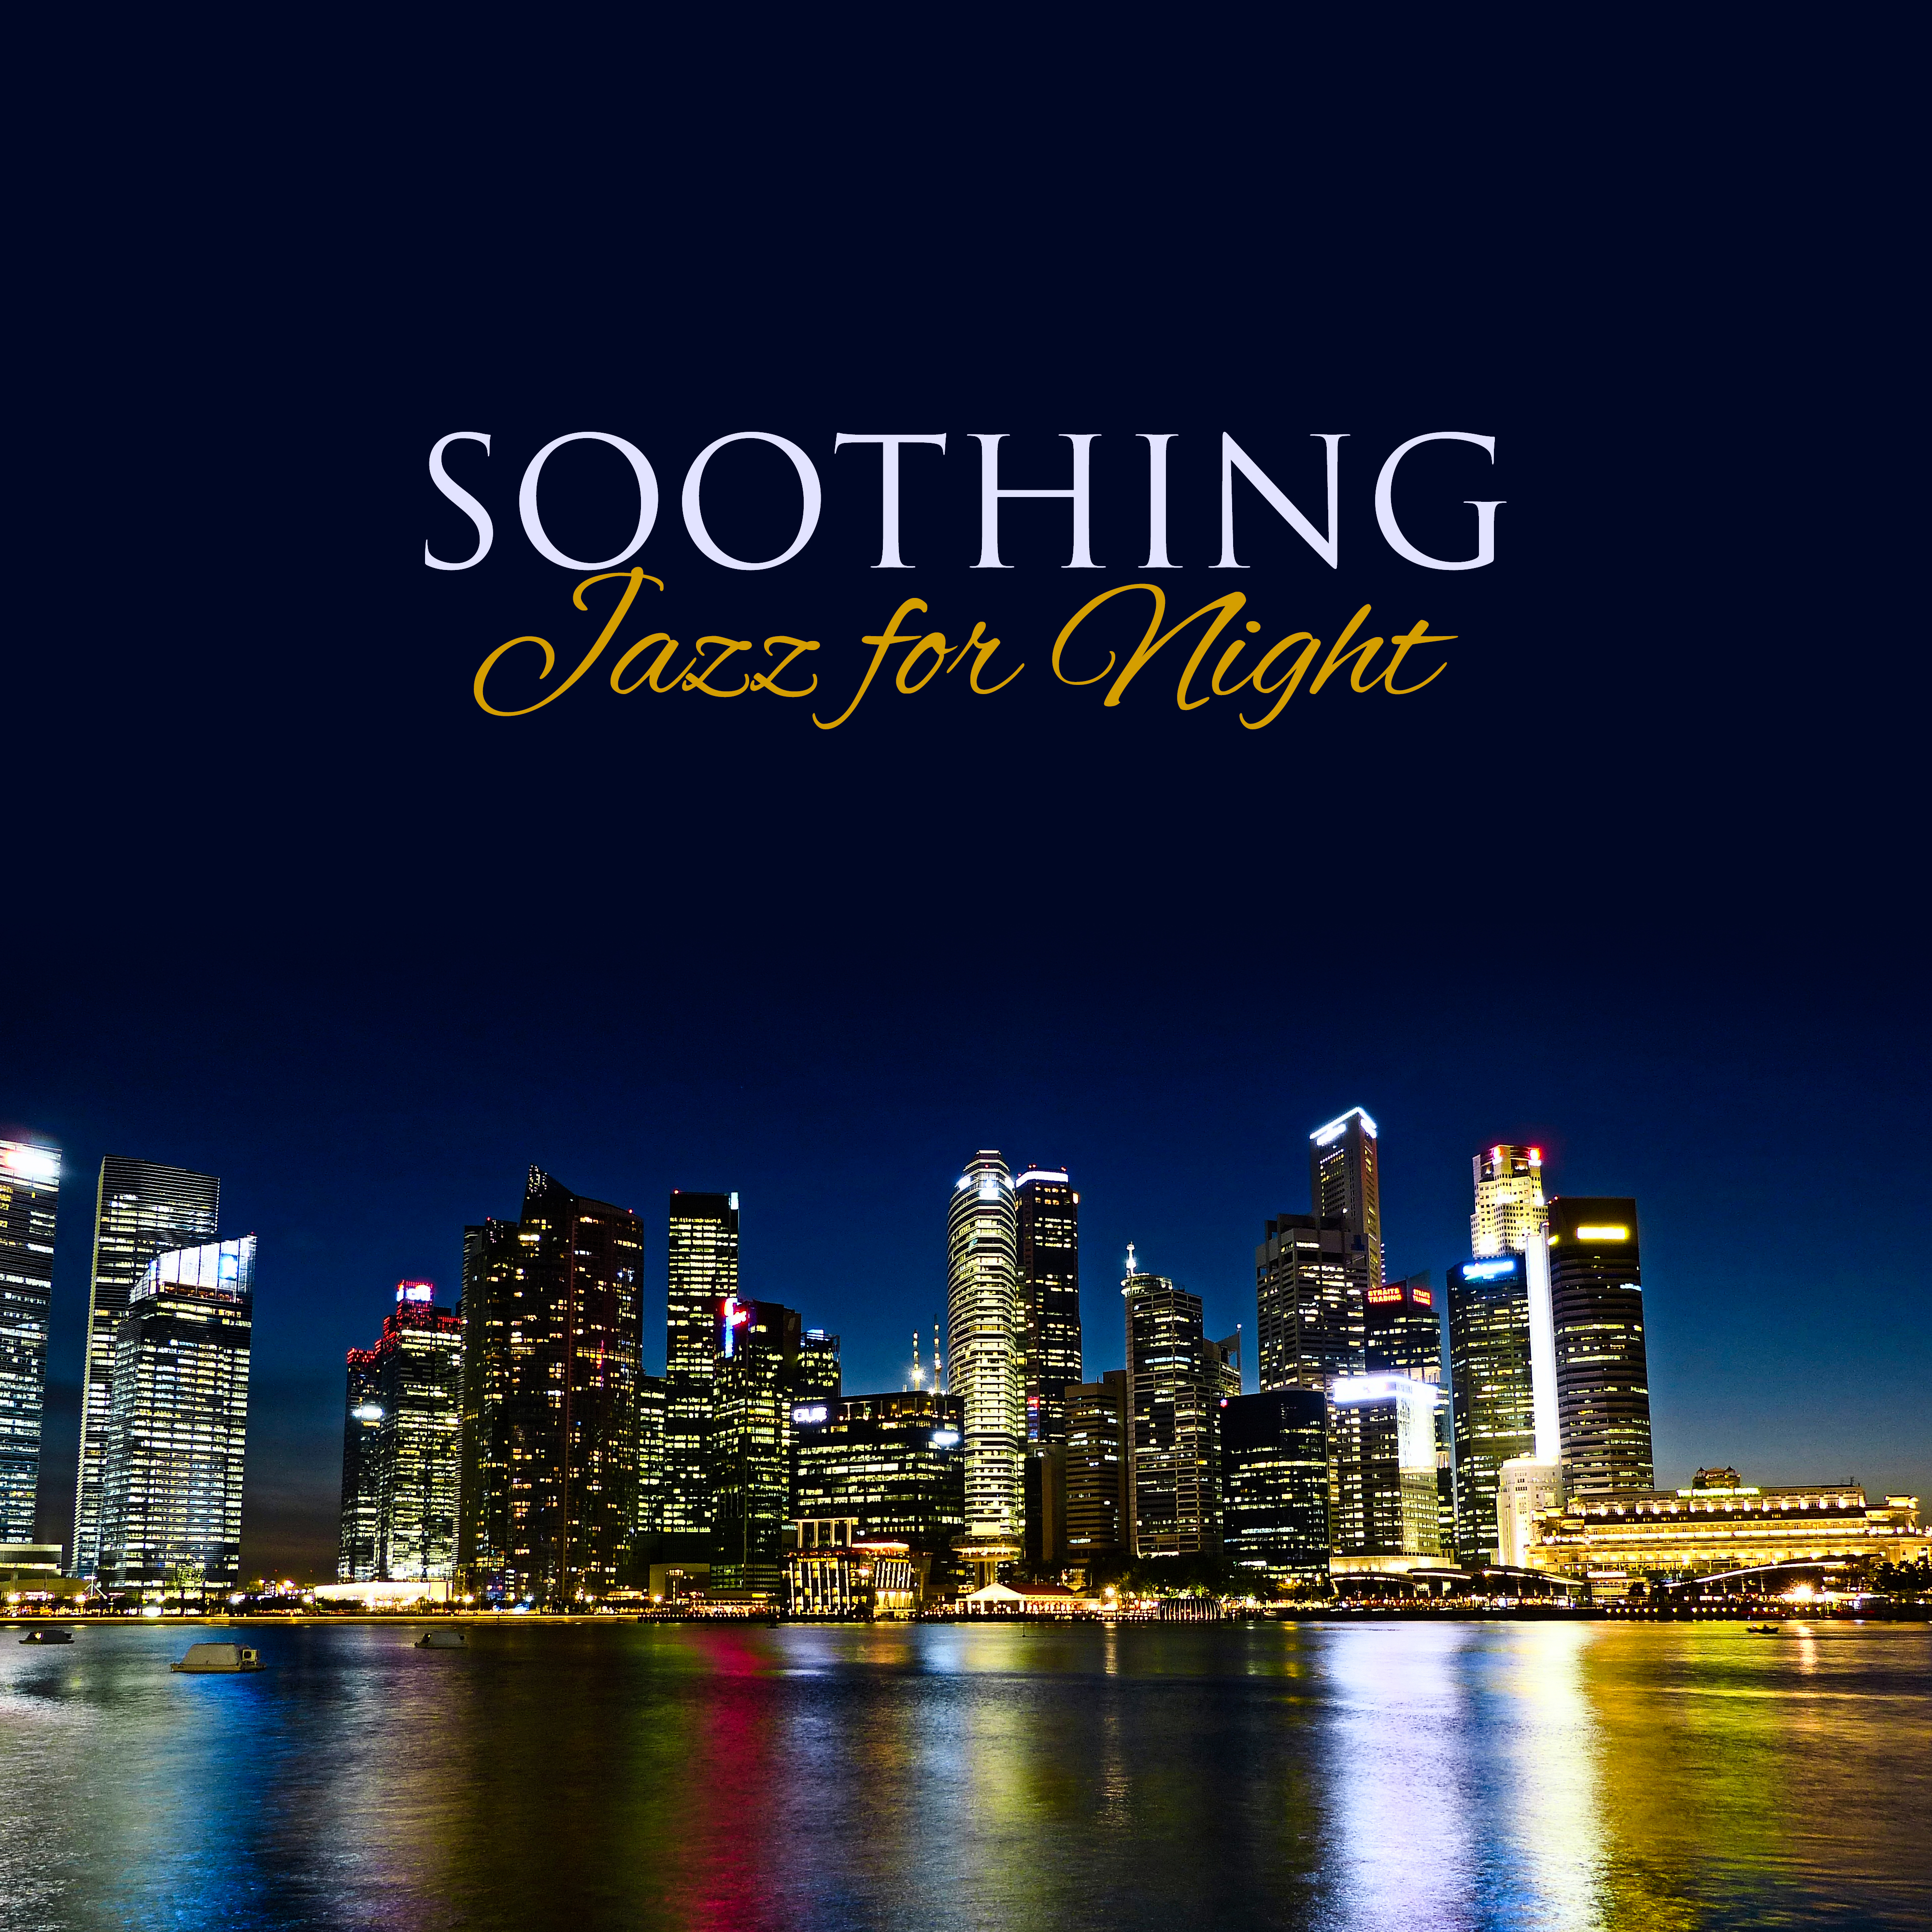 Soothing Jazz for Night  Sweet  Relaxing Jazz Music, Rest All Night, Best Background Jazz Melodies